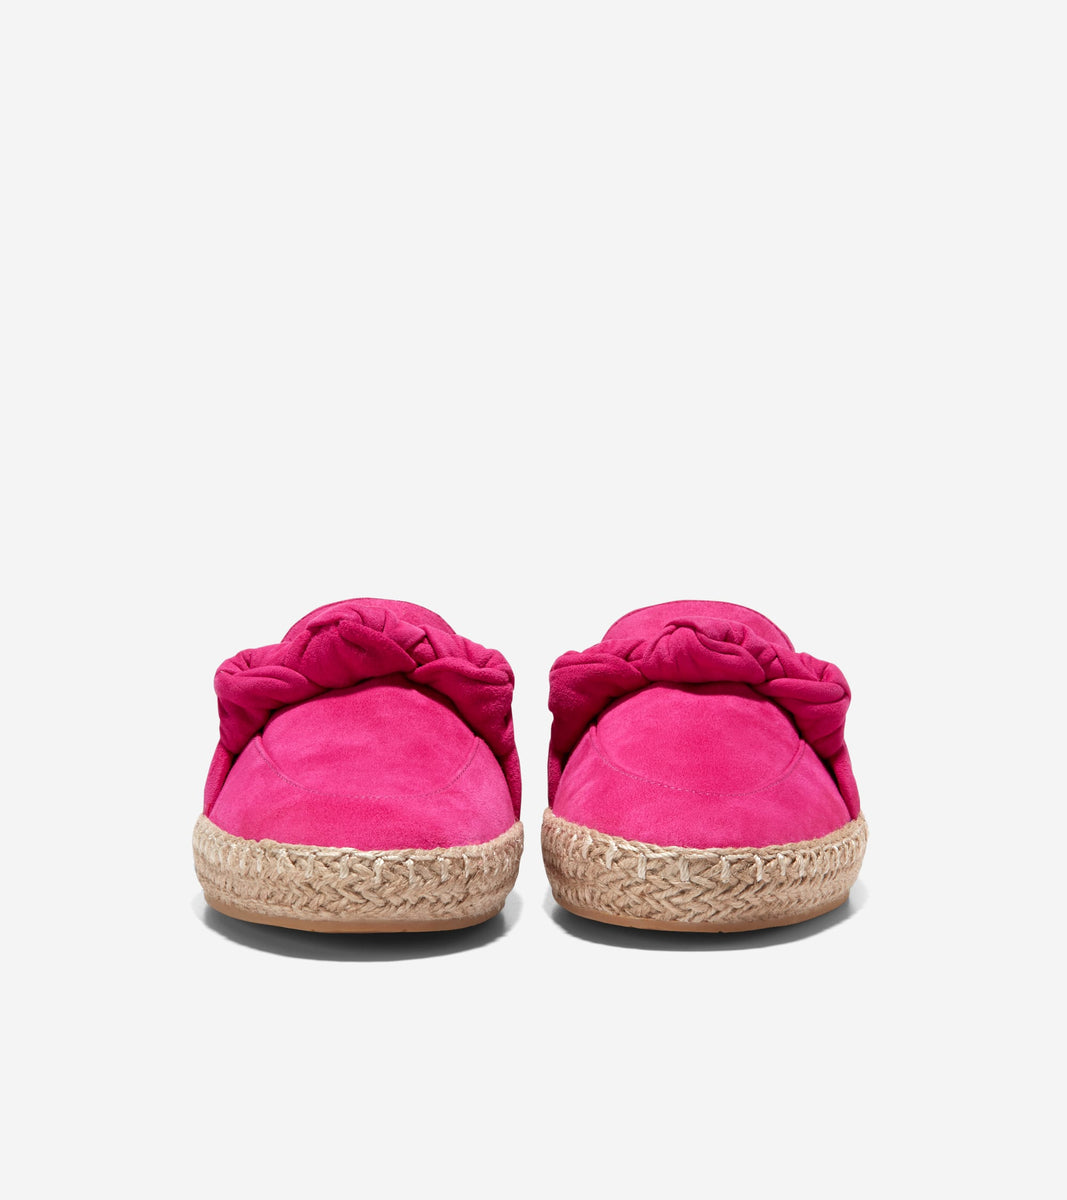 Women's Cloudfeel Knotted Espadrille